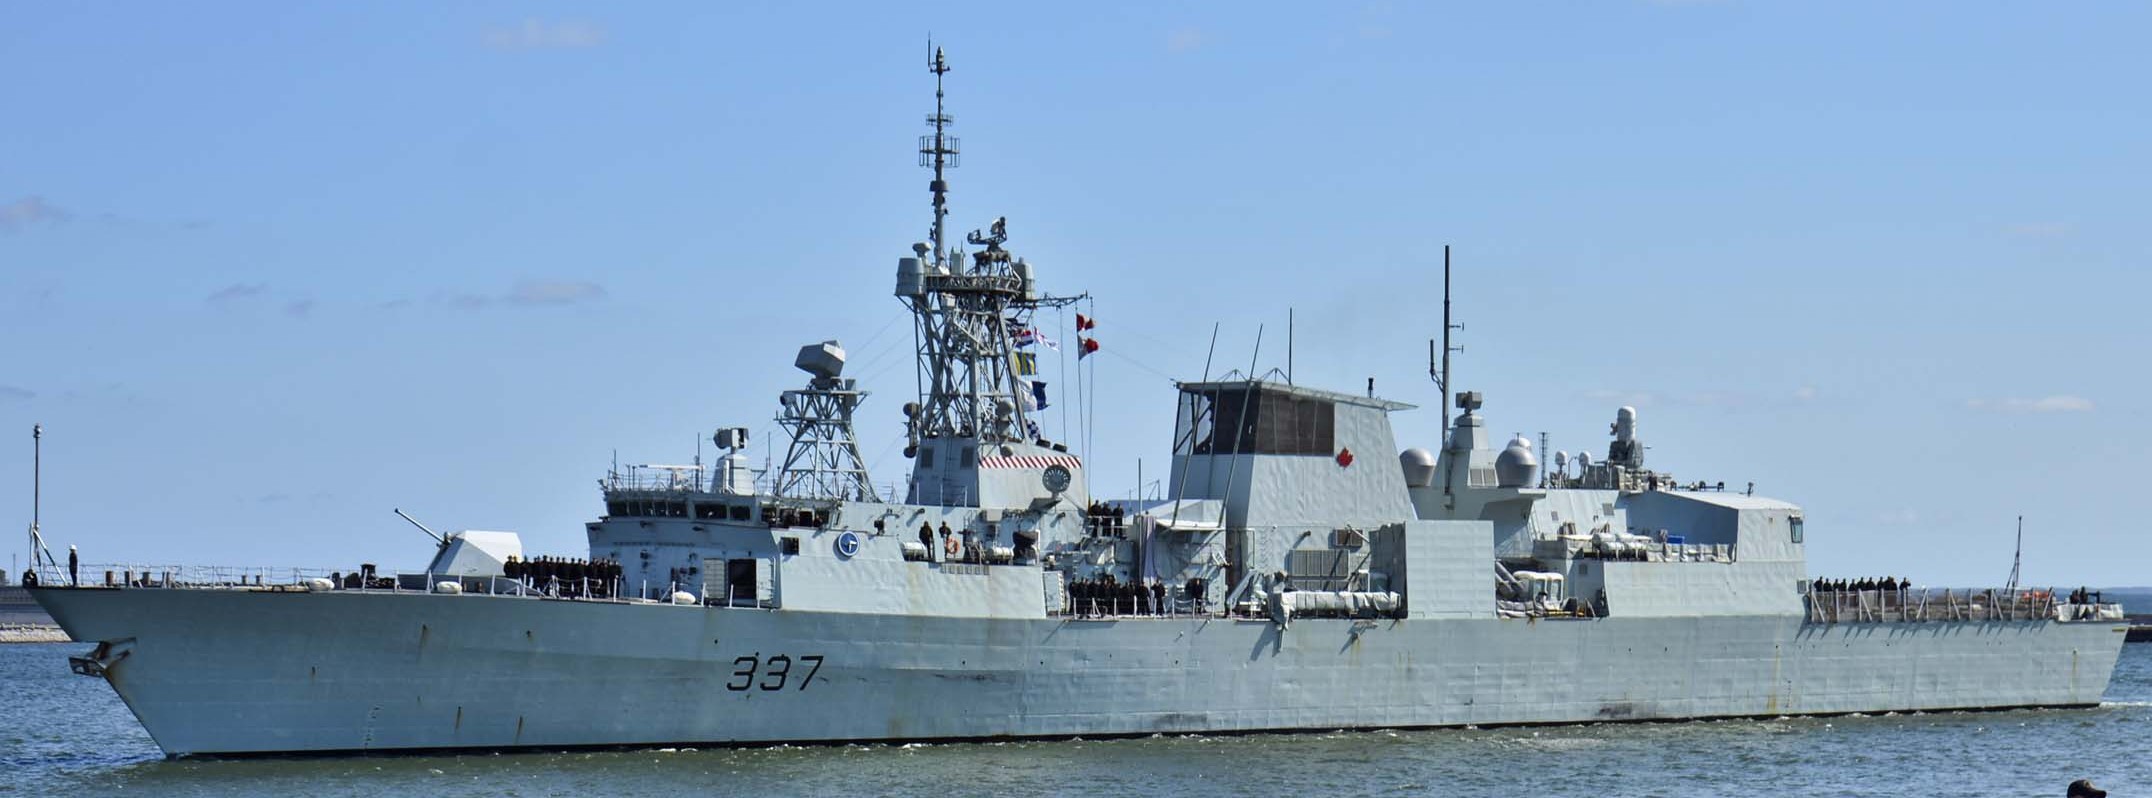 ffh-337 hmcs fredericton halifax class helicopter patrol frigate ncsm royal canadian navy 06